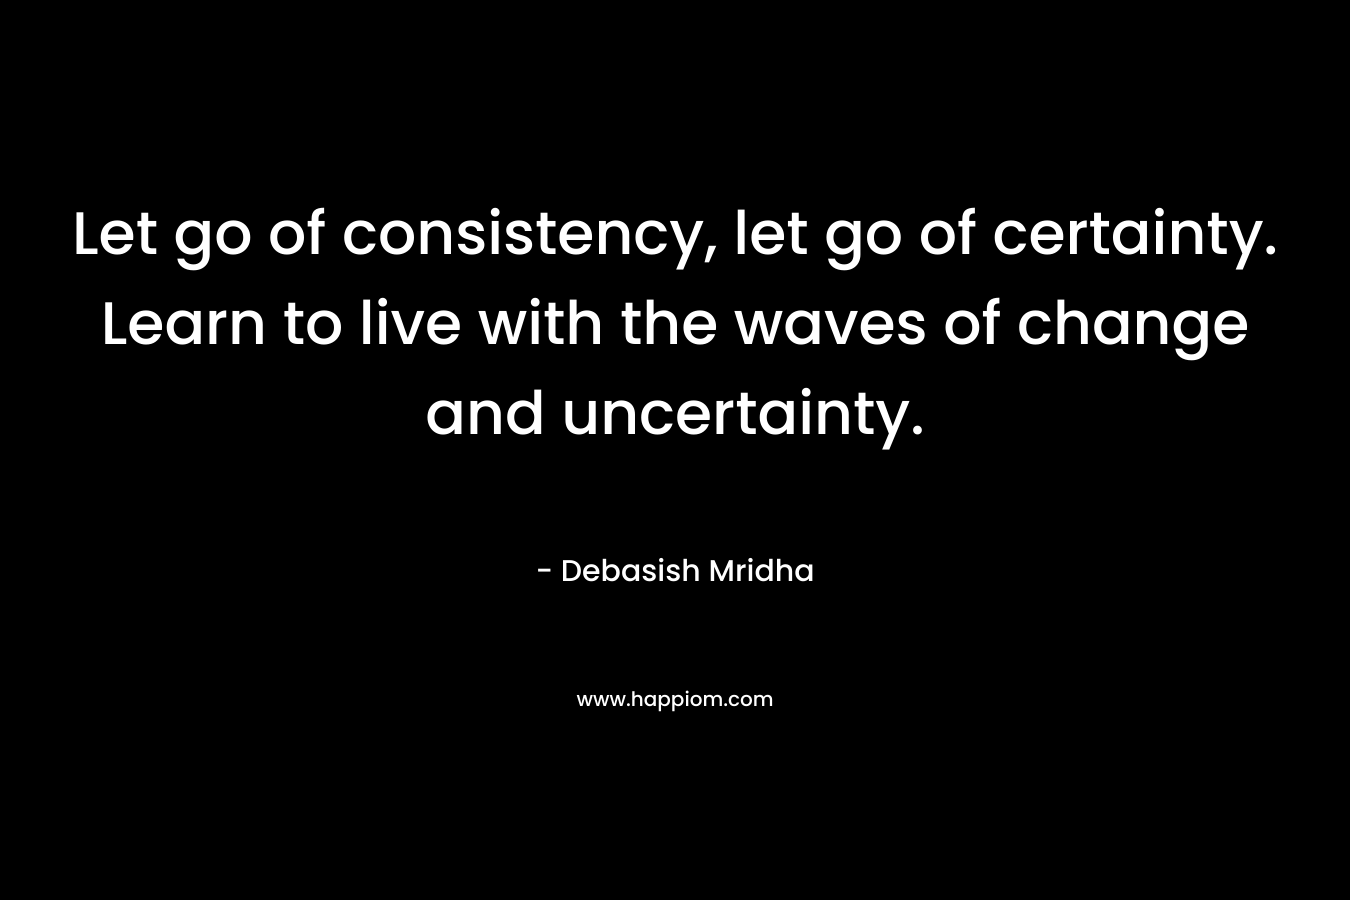 Let go of consistency, let go of certainty. Learn to live with the waves of change and uncertainty.